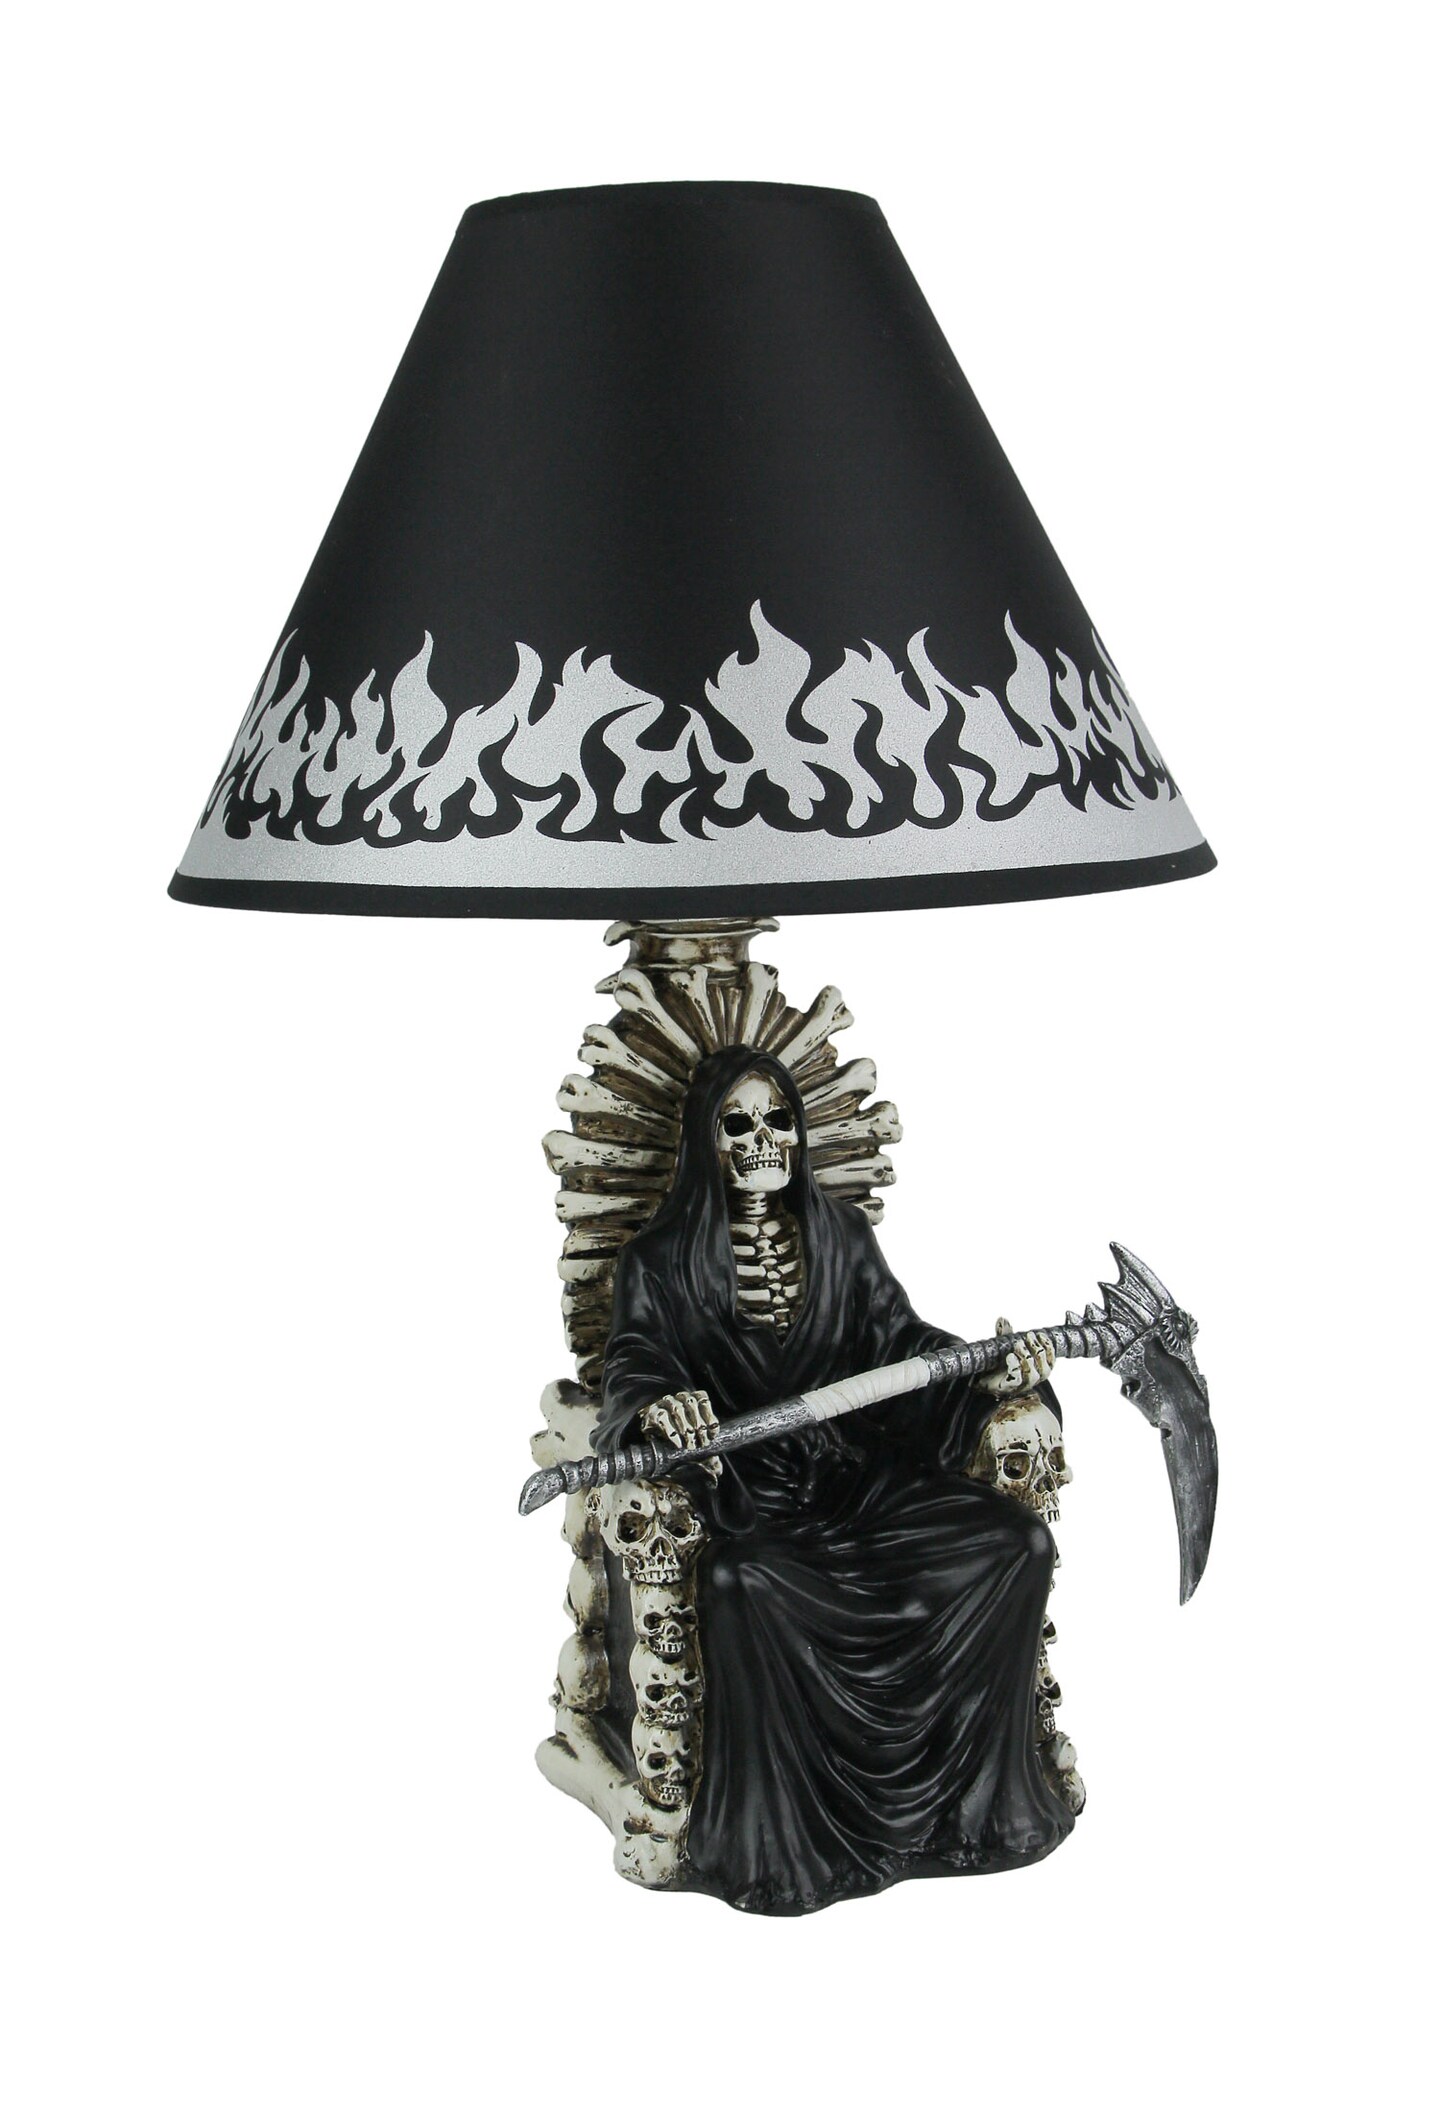 Shadow of Judgement Grim Reaper on Throne Table Lamp and Fabric Flame Shade